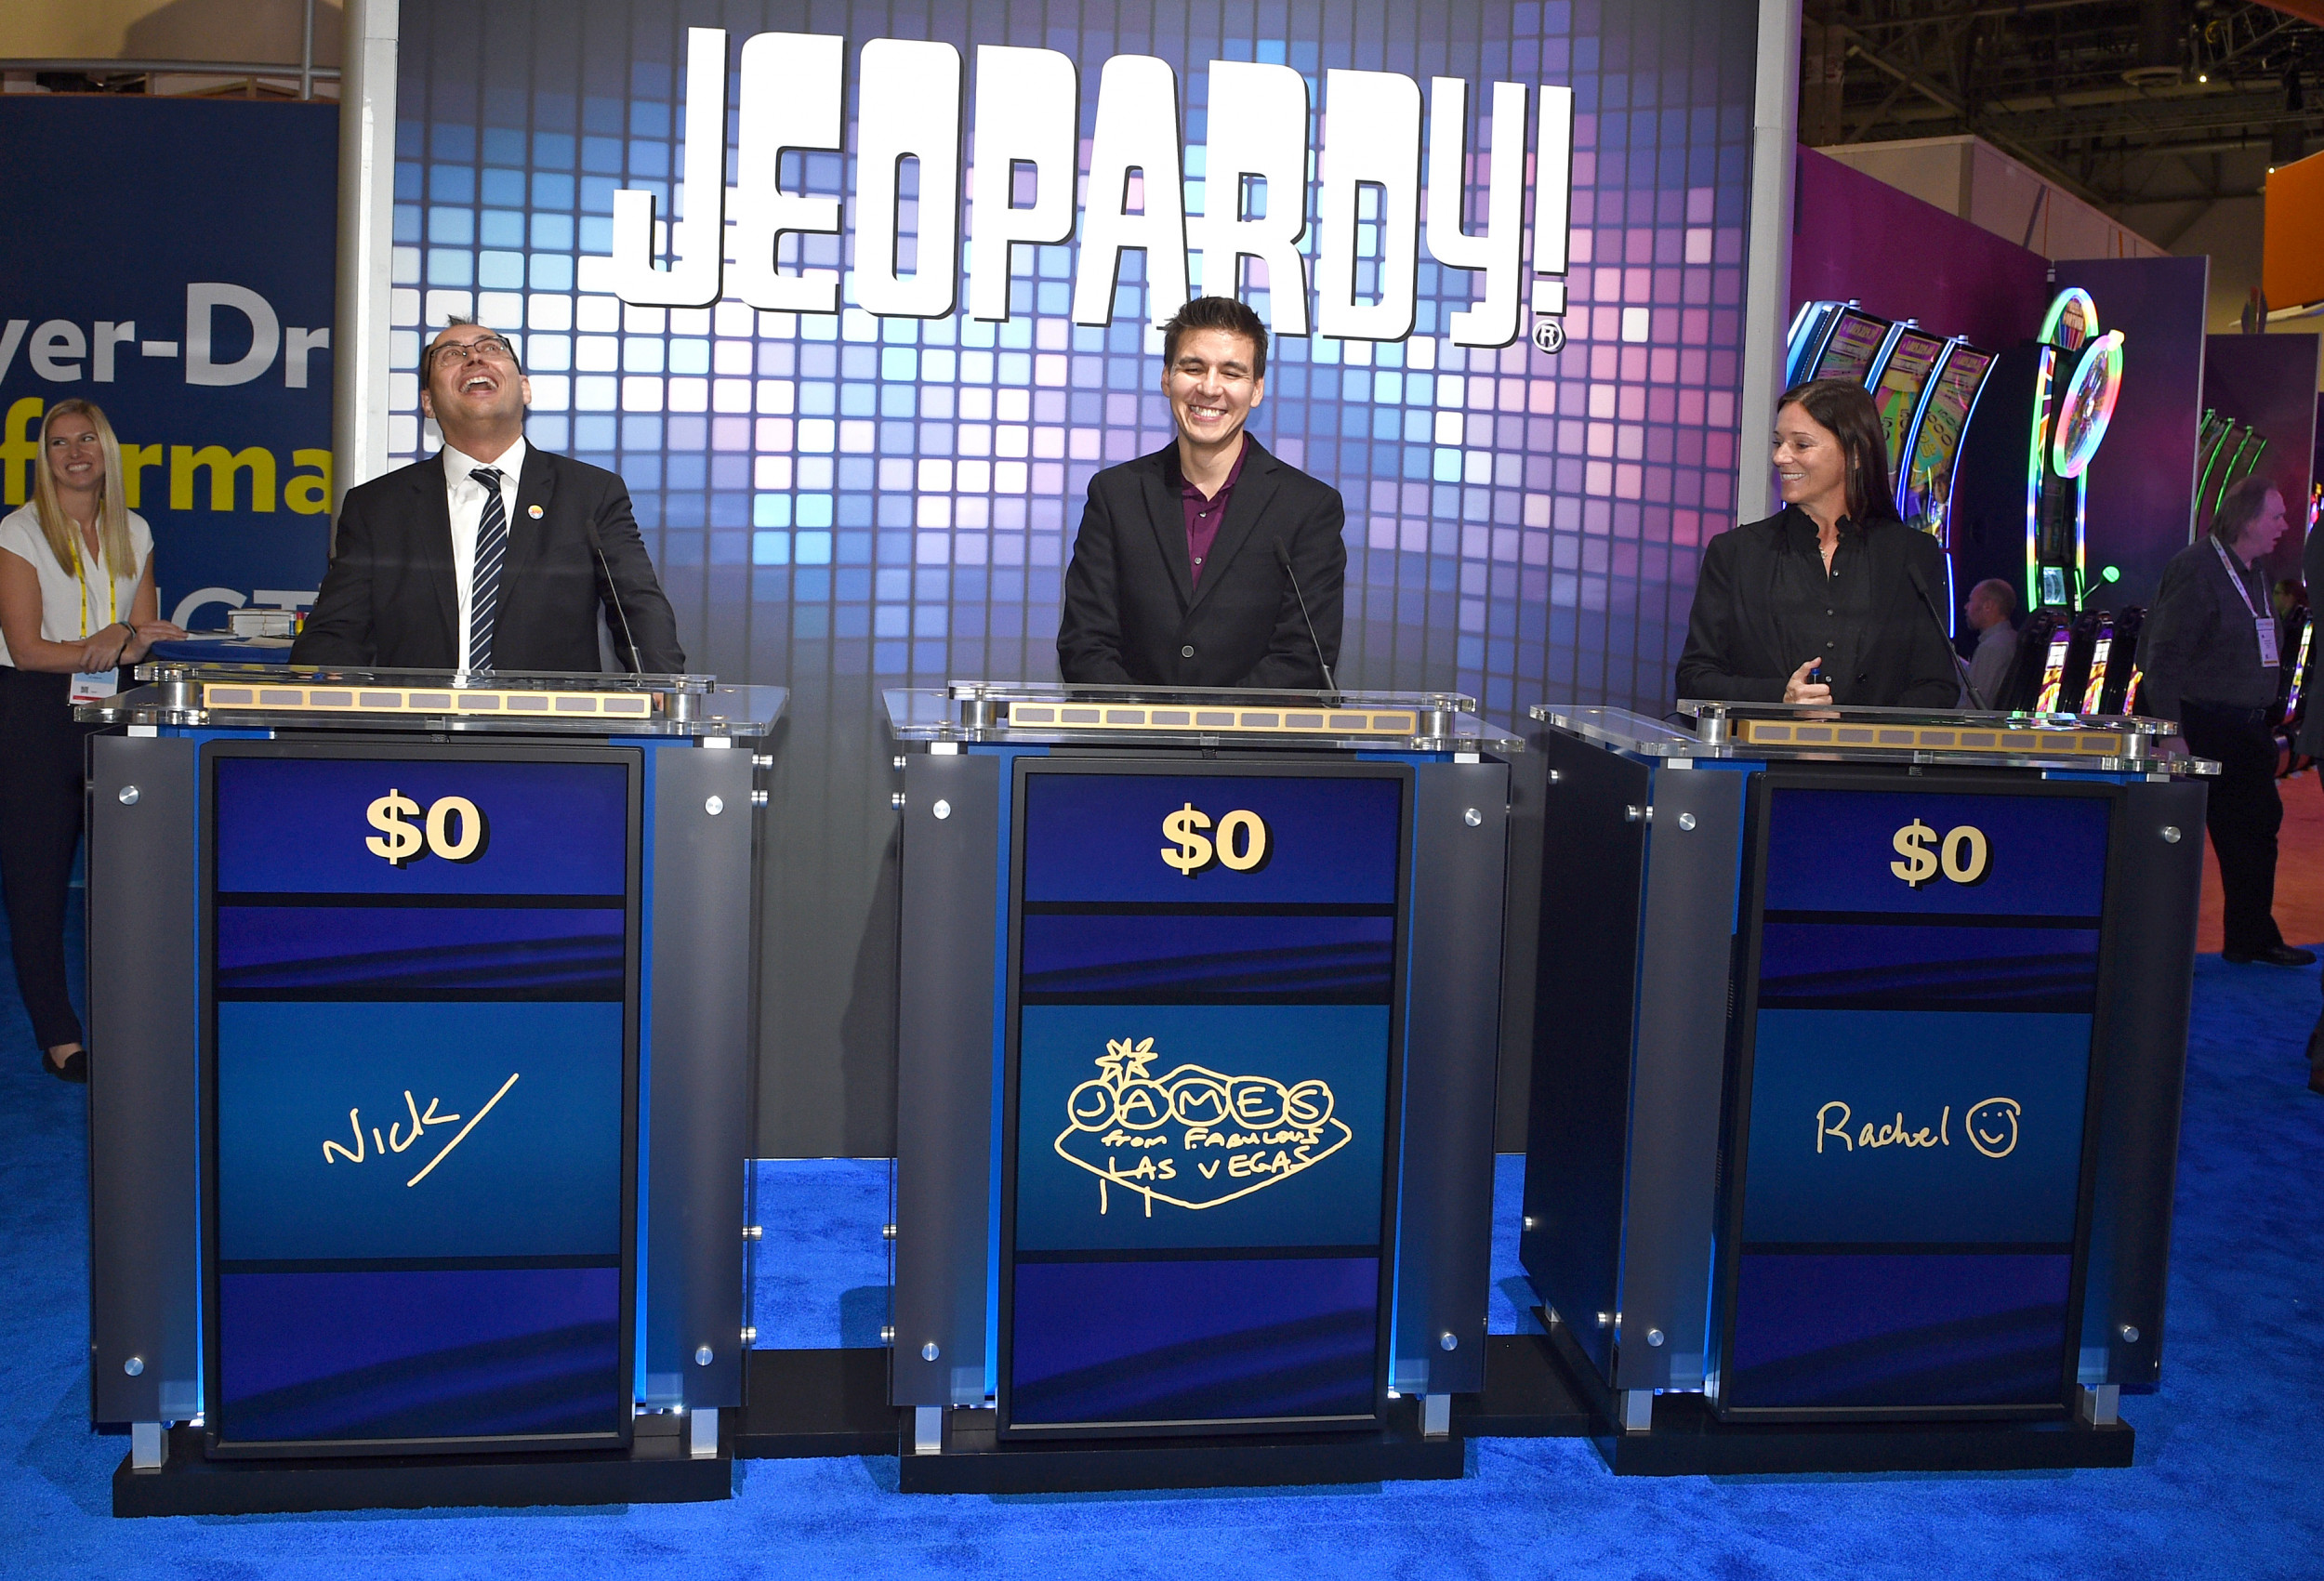 How to Watch 'Jeopardy!' Champions James Holzhauer, Ken Jennings and